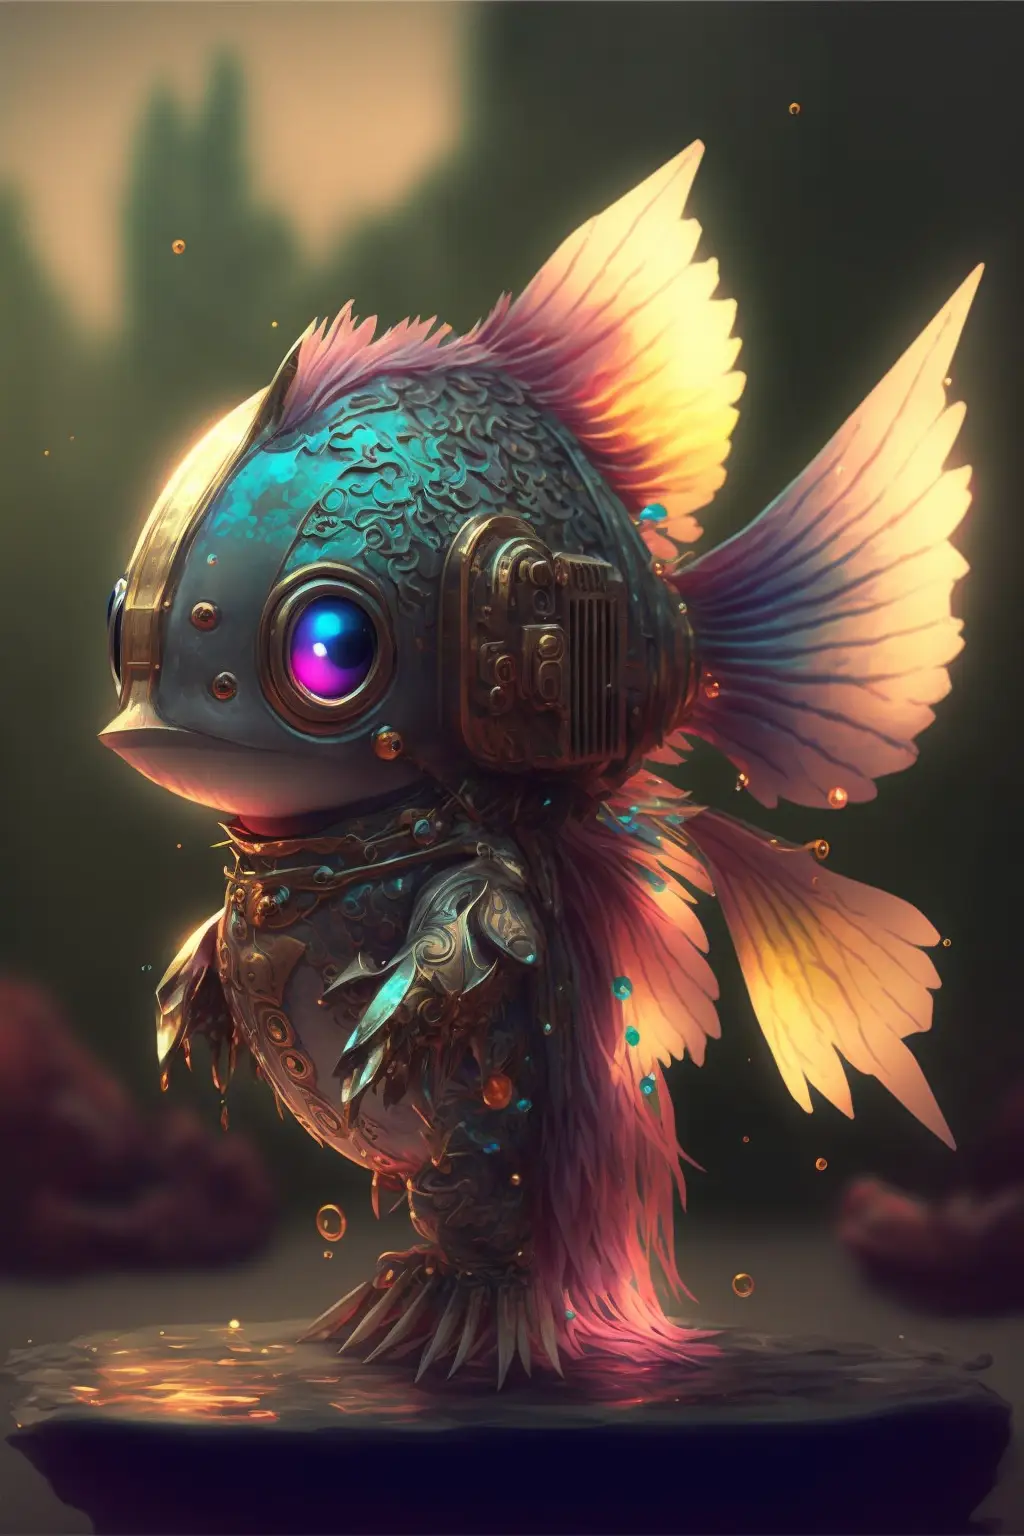 Cute Chibi Betta Fish Masked Ironman/Robotech-Mecha Fusion, Cyber-Medieval Cyber-Samurai, Hyperdetailed, Dripping Iridescent Oil + In The Style Of Dinsey, Pascal Blanche And Dominic Qwek And Nicolas De Stael + Cinematic Lighting, Samuraipunk Cyberpunk Atompunk, Splattered Oil Paint, Digital Glitches --Ar 2:3 --V 4